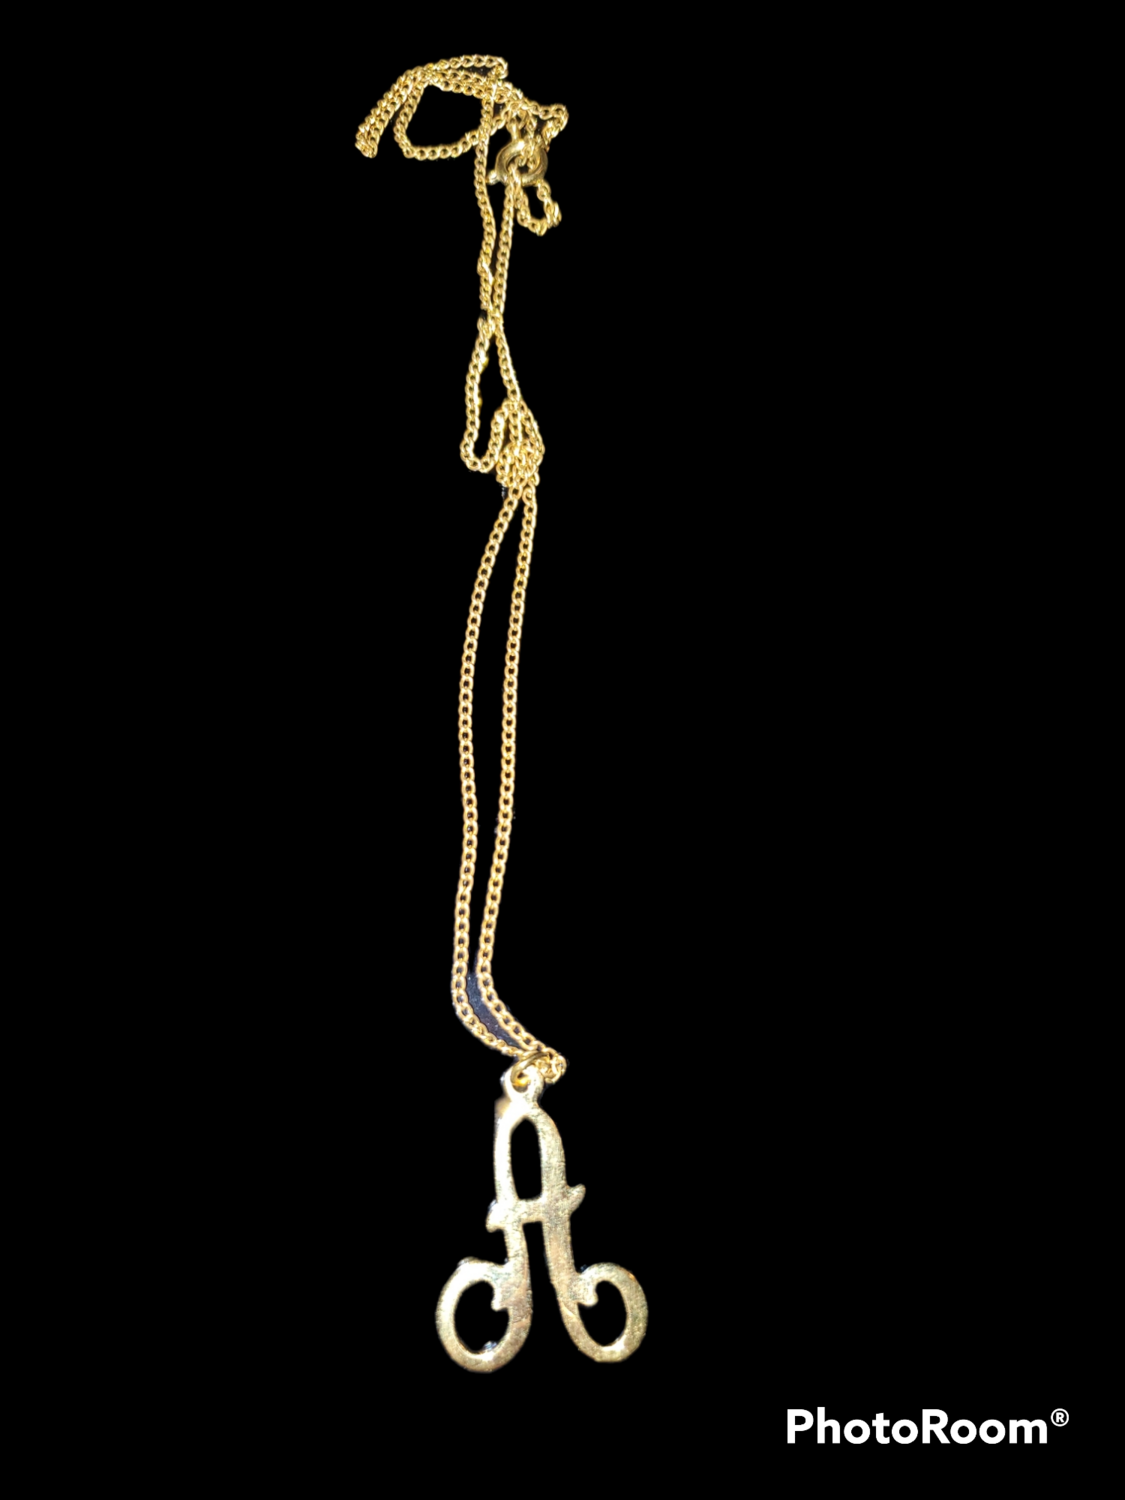 Necklace with the letter A pendant